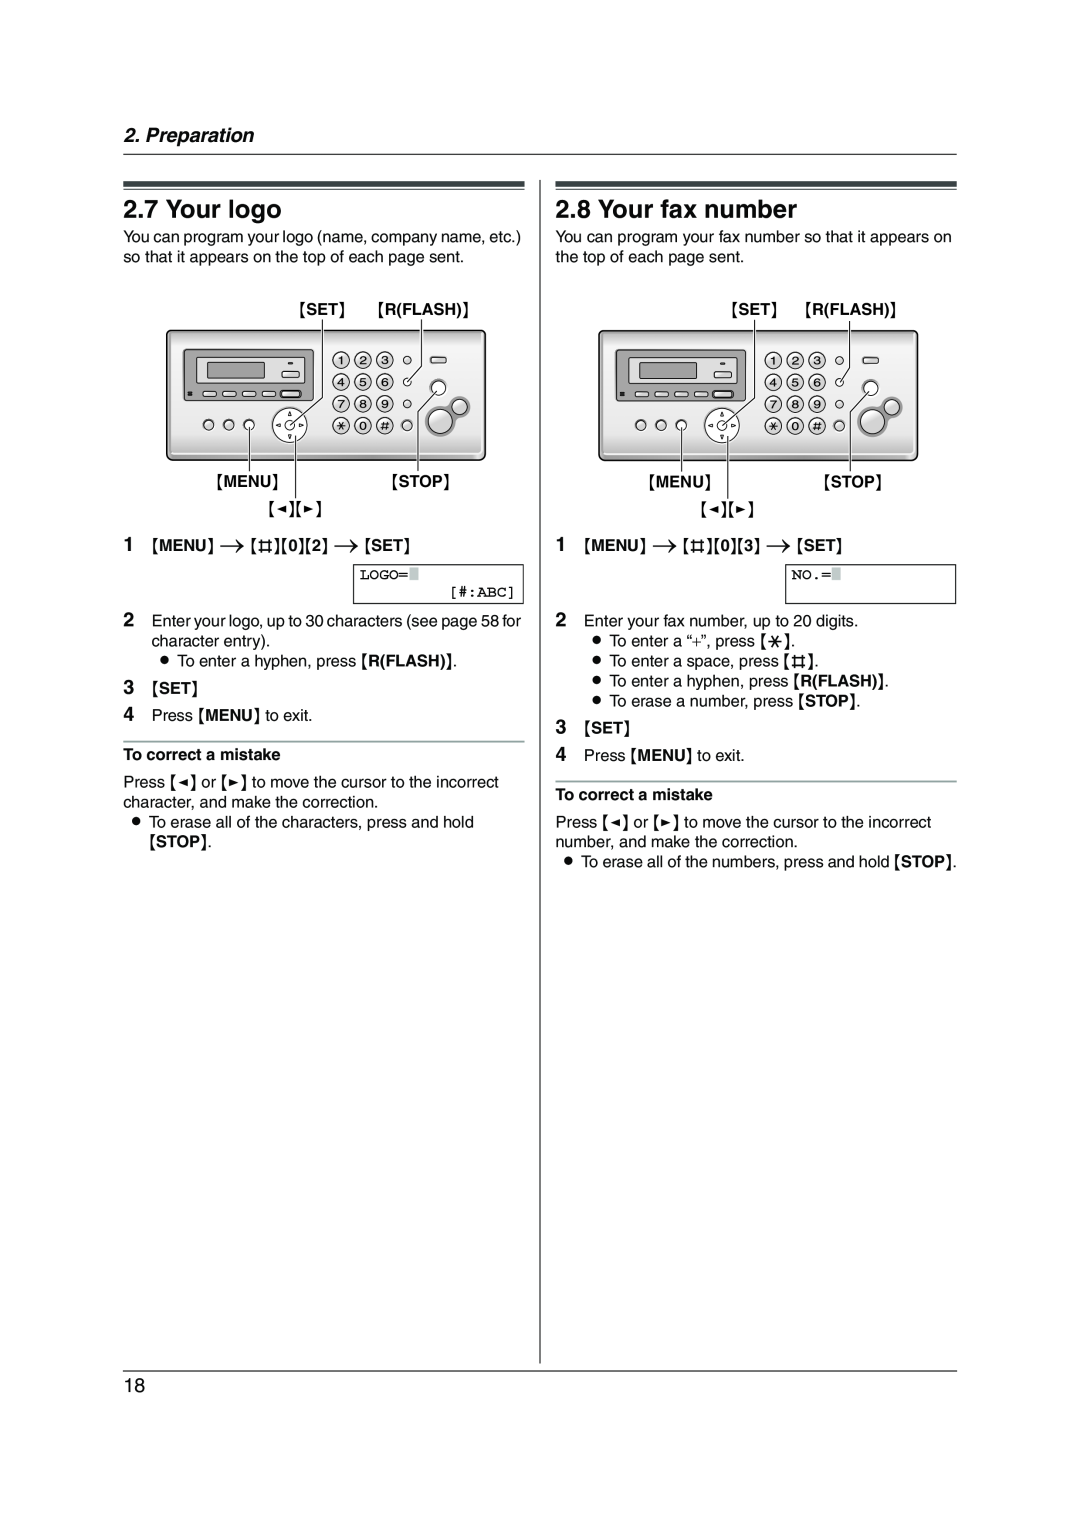 Panasonic KX-FC228HK operating instructions Your logo, Your fax number, Preparation, Logo= #Abc, No.= 